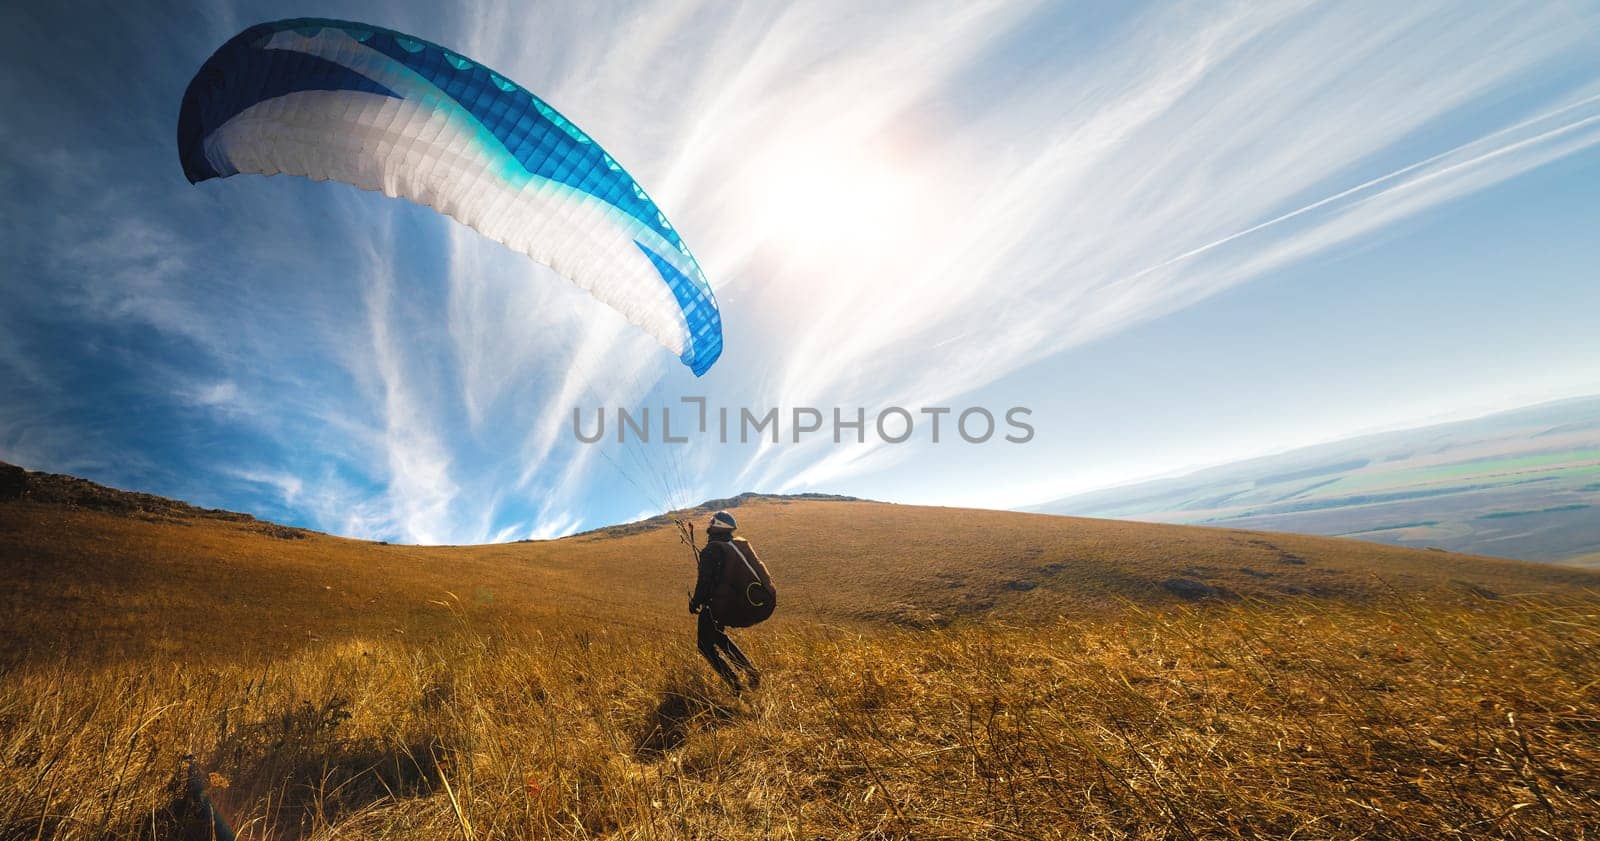 Paragliders take off from a yellow meadow, a man's legs open from the ground, taking off with a parachute upward. Panoramic view of the hills and nature.